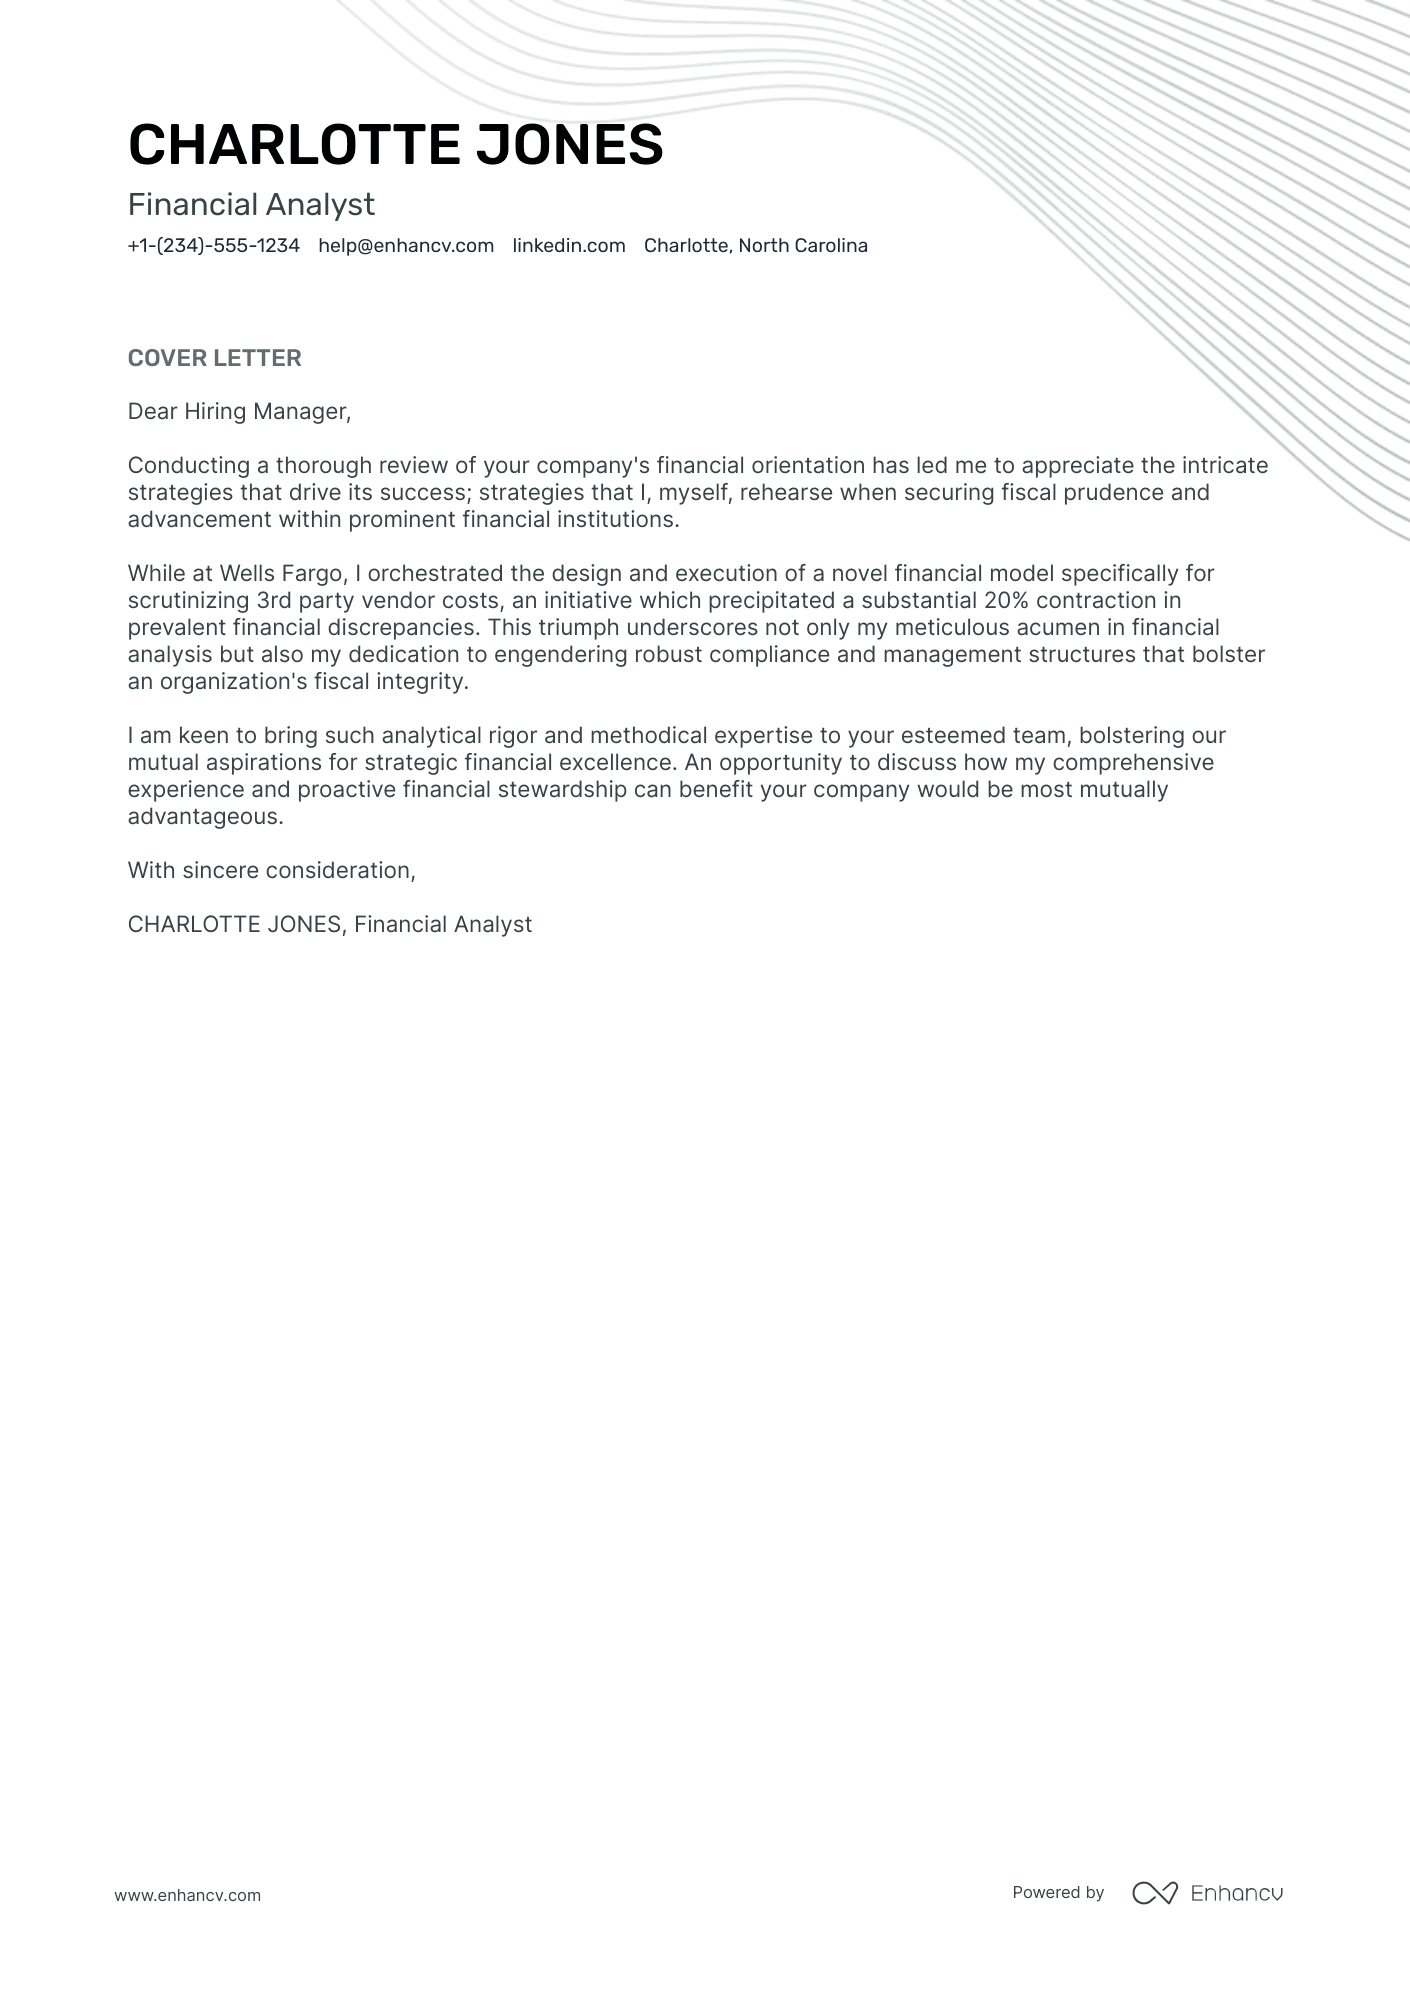 data analyst role cover letter